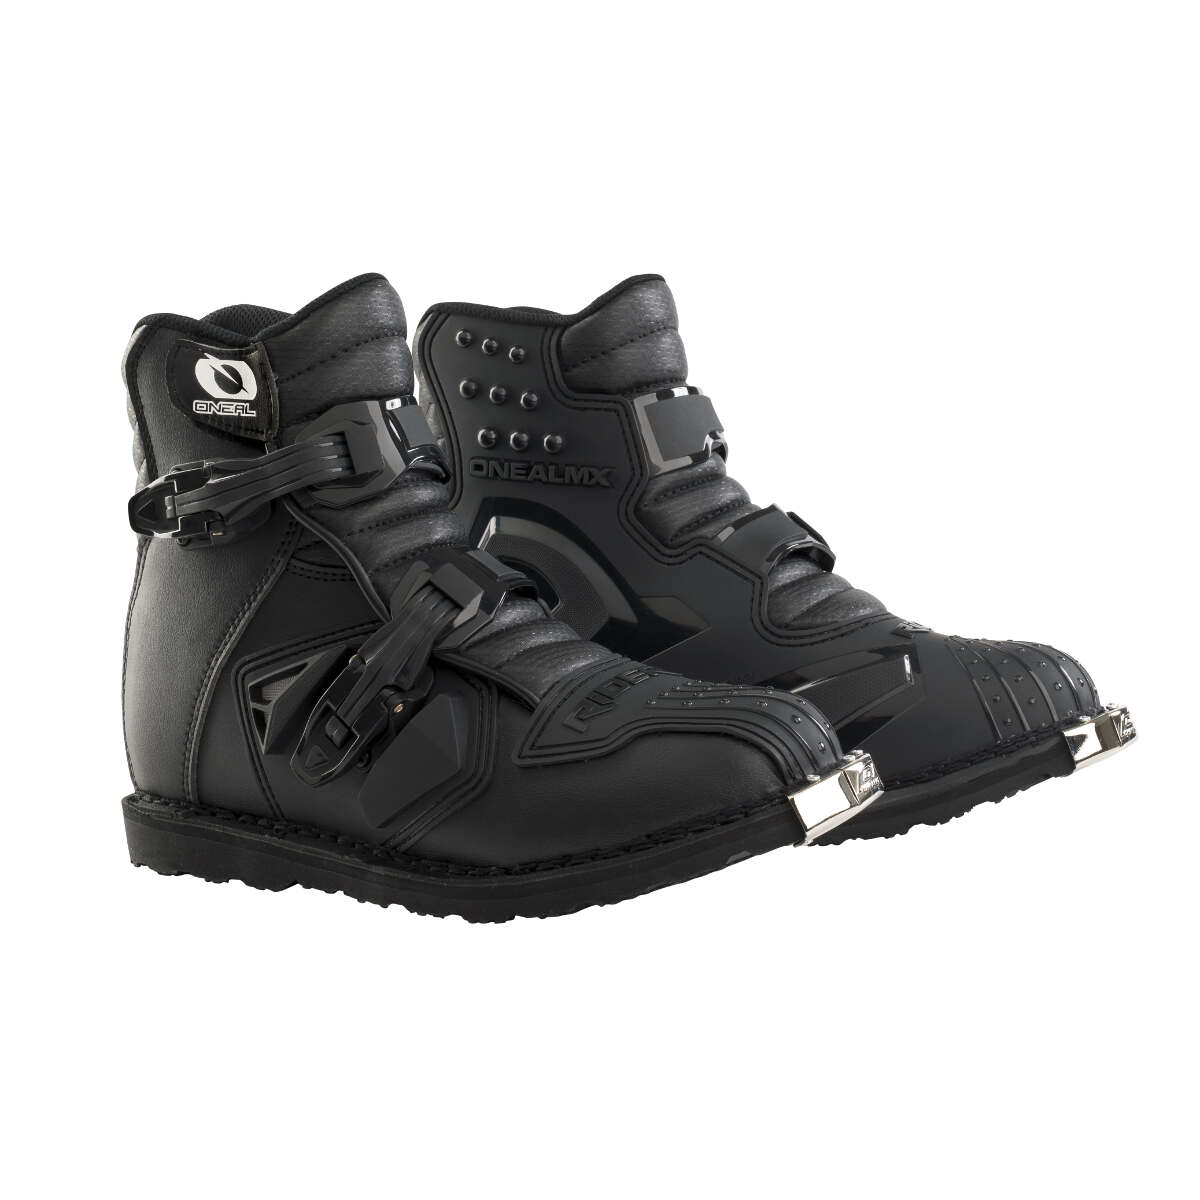 O'Neal MX Boots Rider Shorty Black